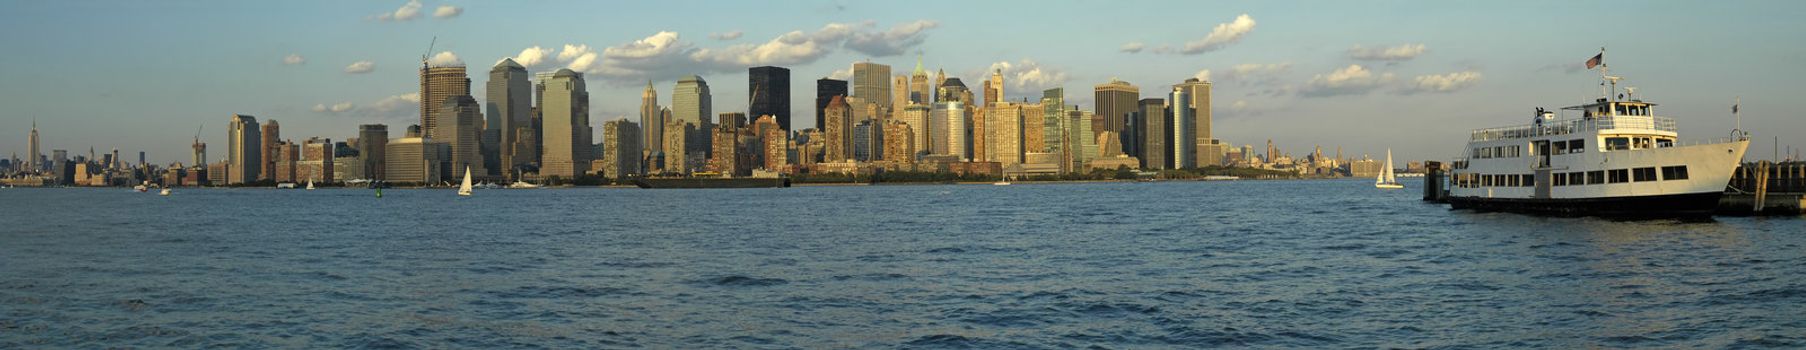 Manhattan panorama photo, white passenger boat in foreground, photograph taken from New Jersey